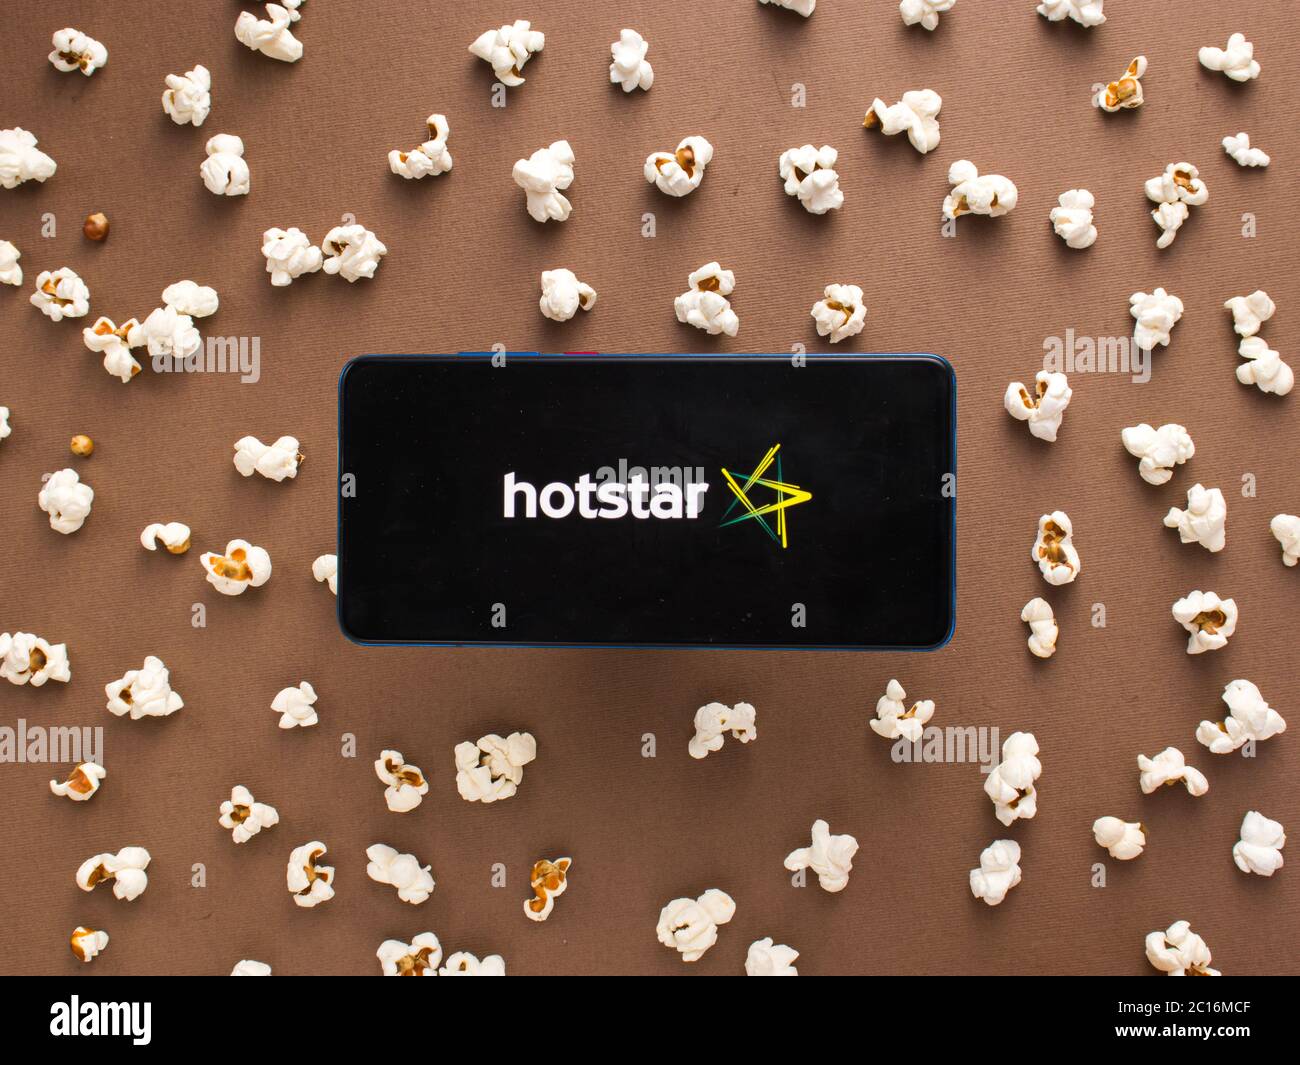 Hotstar mobile app logo - a video streaming service photographed for stock